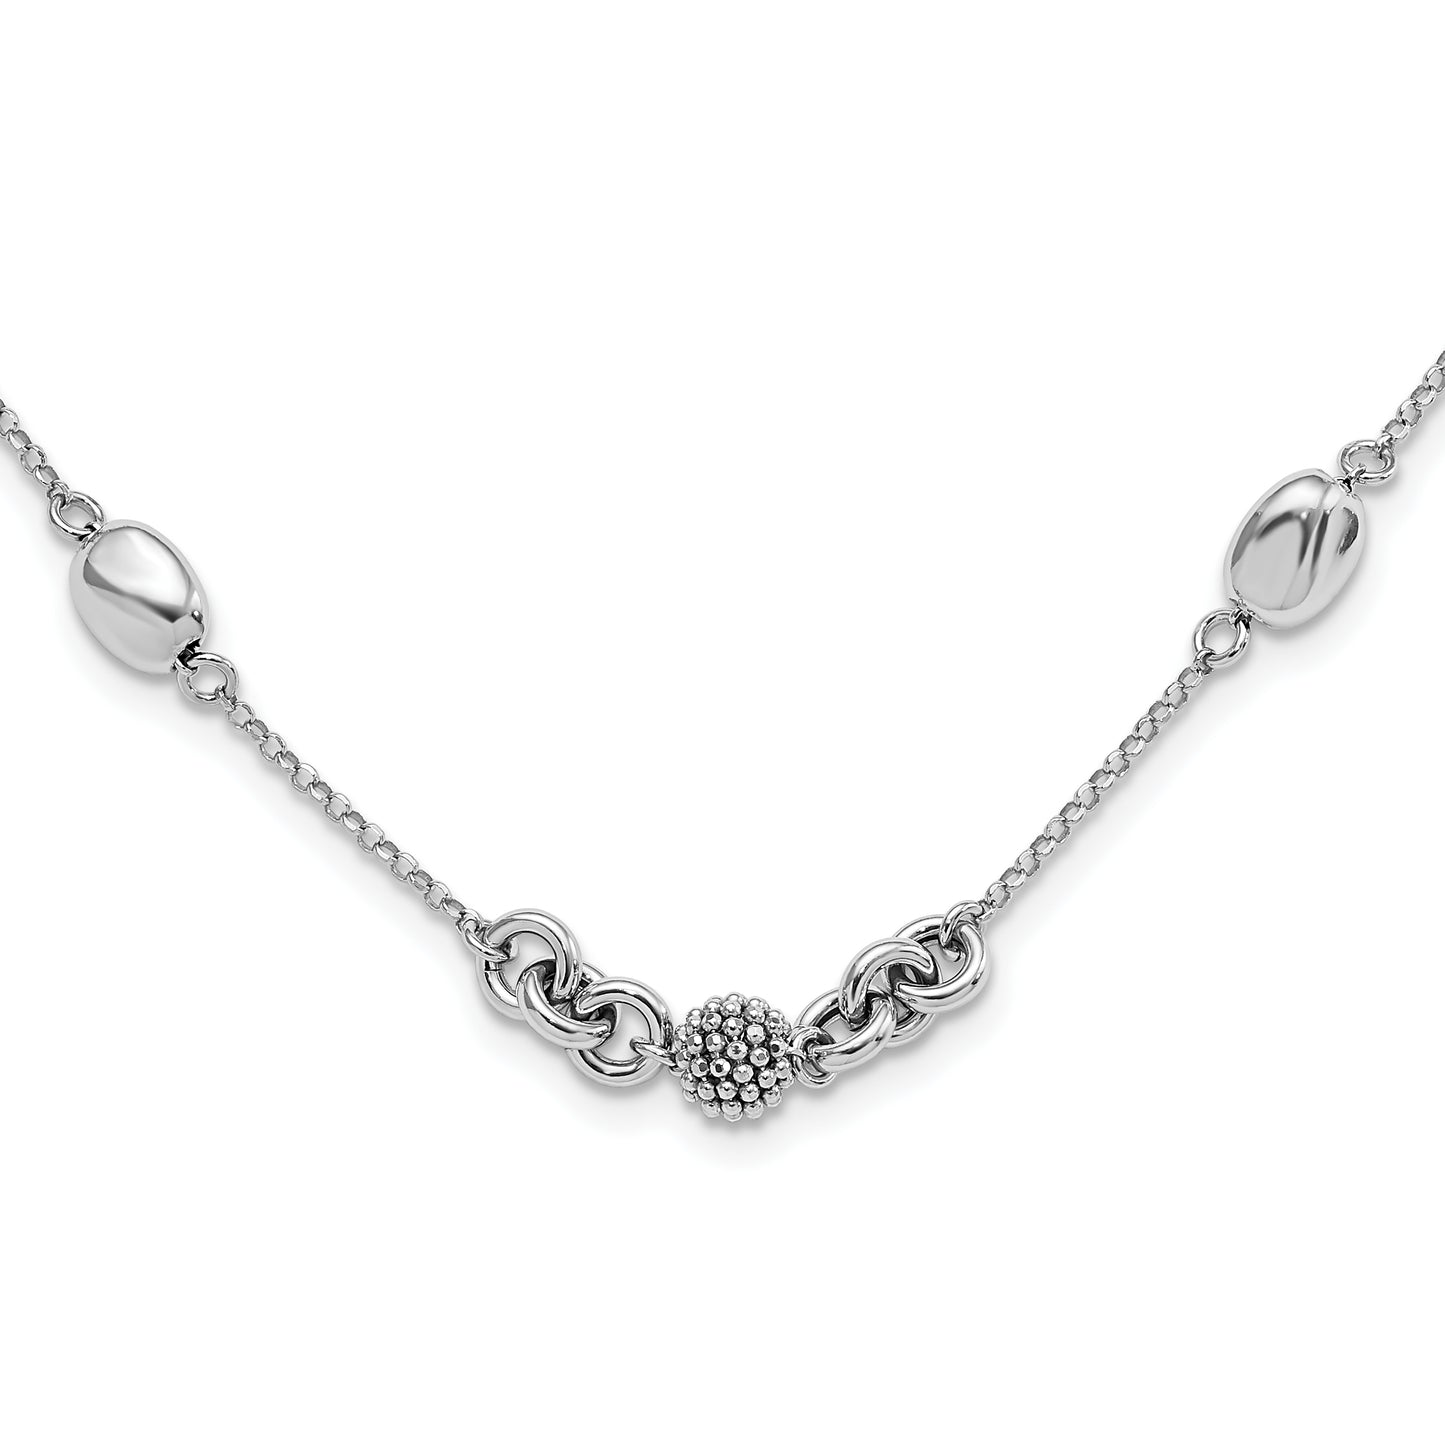 Sterling Silver Rhodium-plated Beaded Fancy Necklace